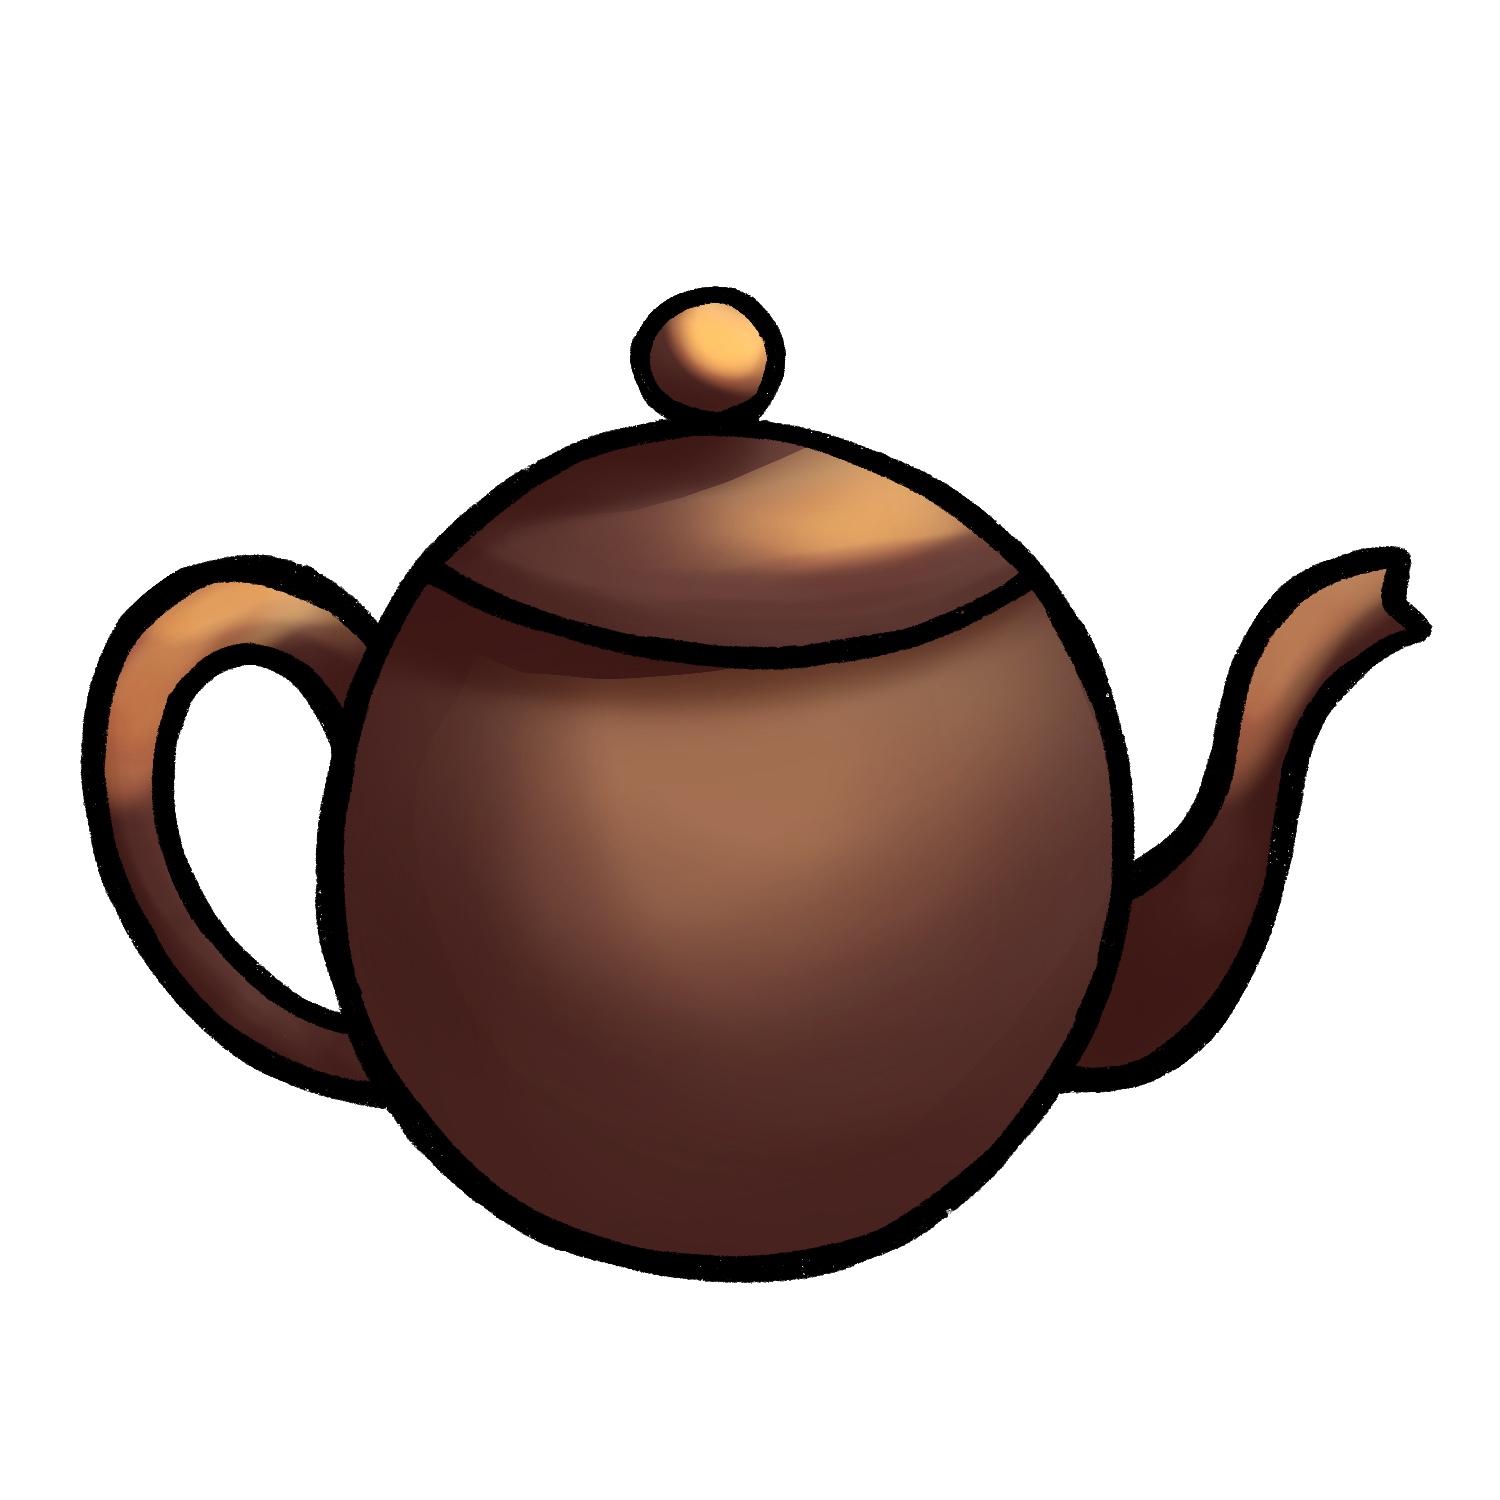 Teapot drawing easy steps